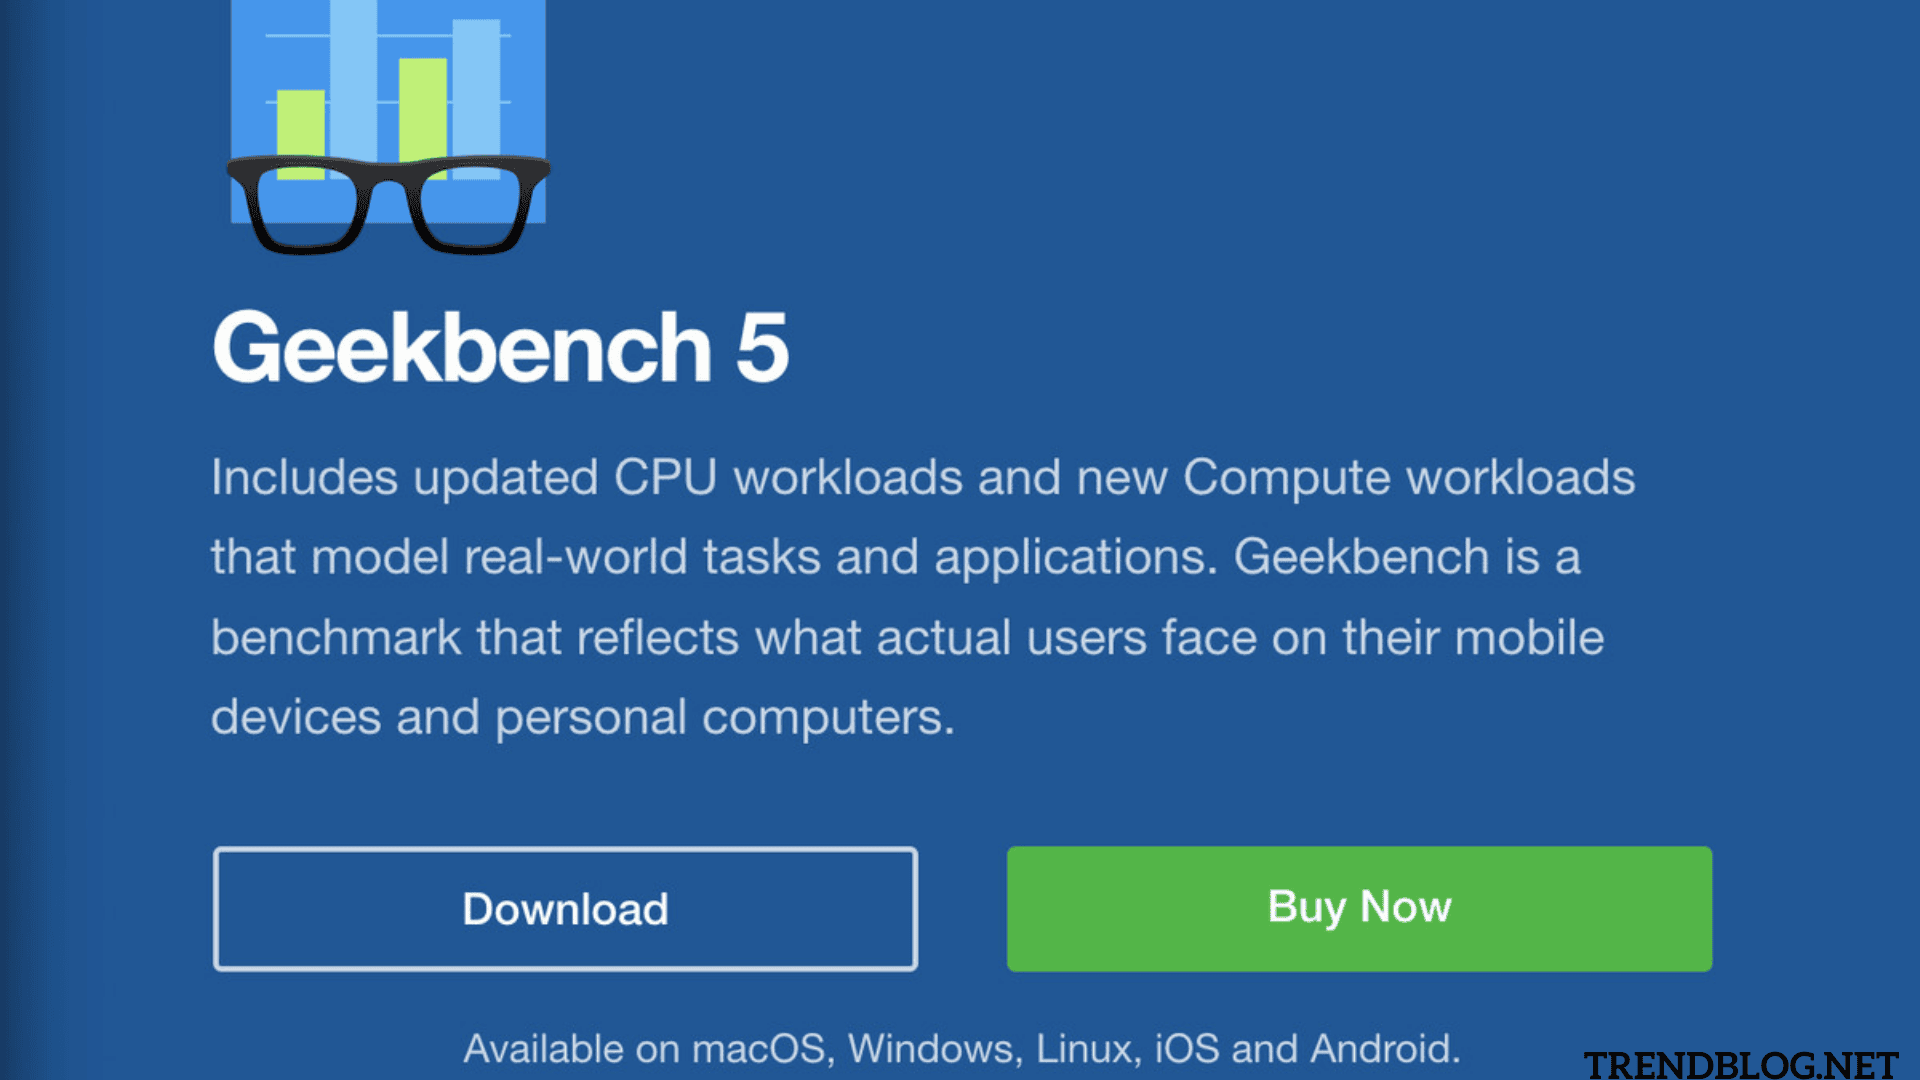 Geekbench on your phone or computer